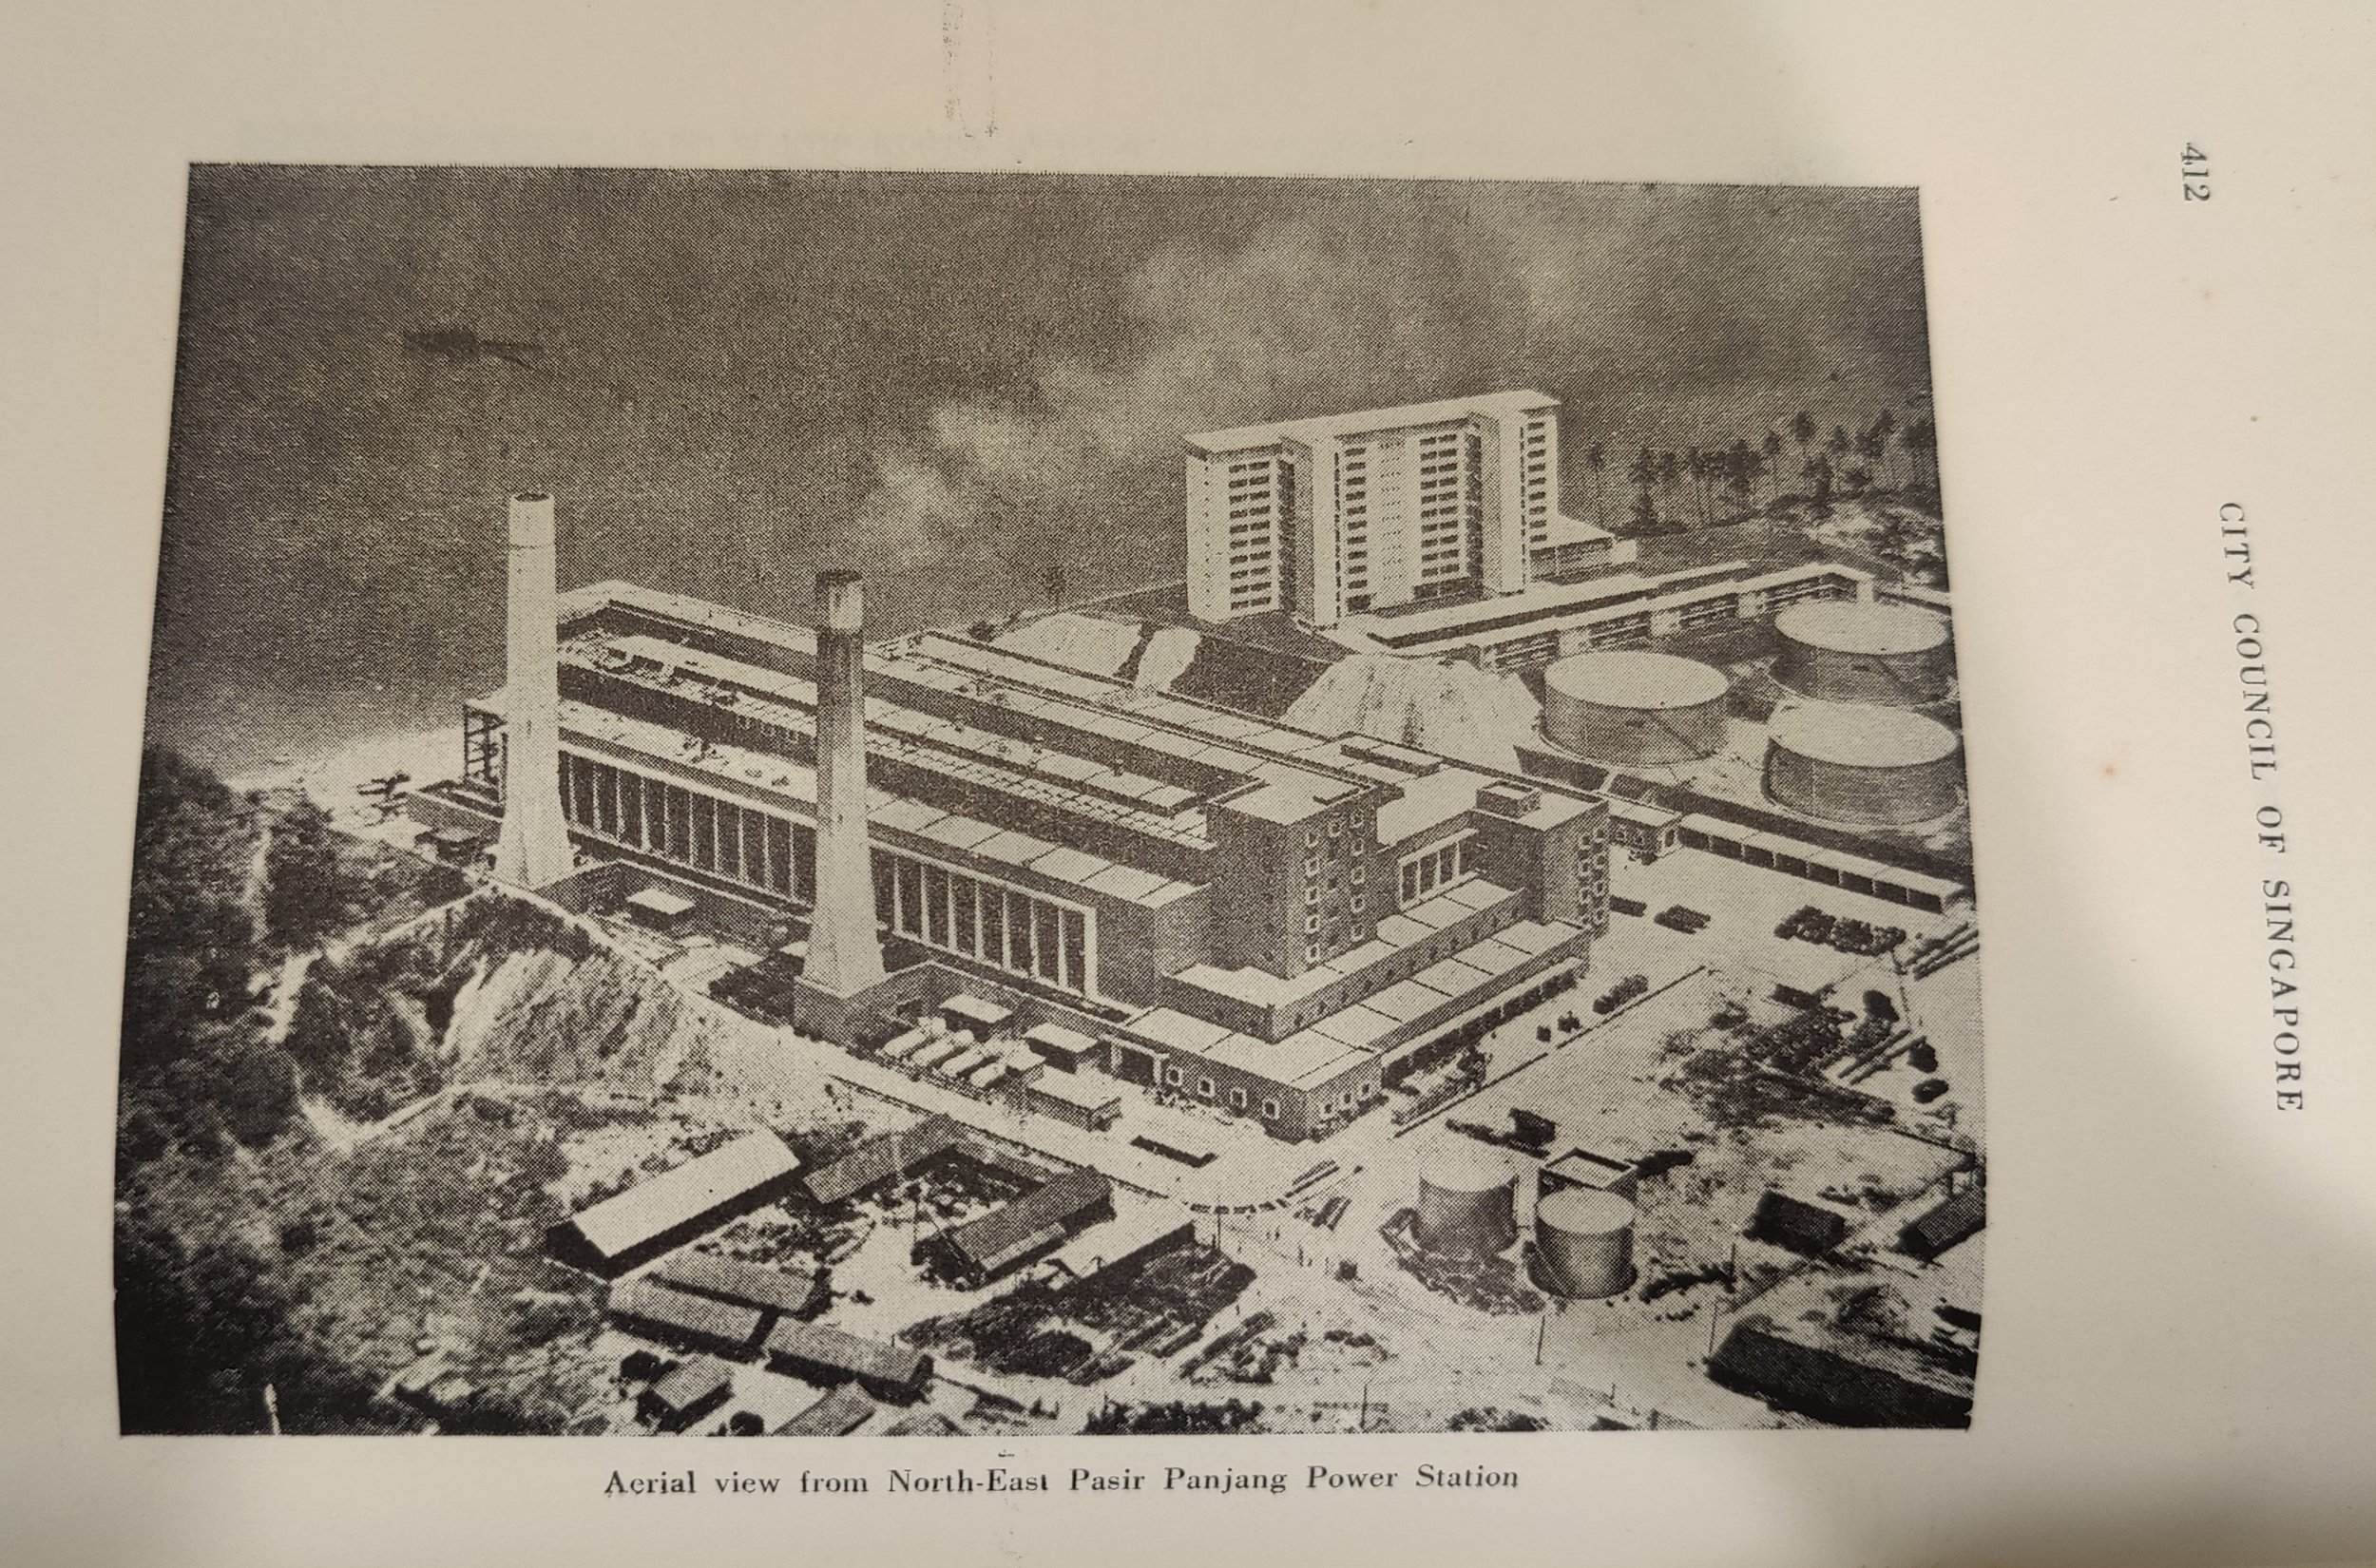 Image source: City Council of Singapore Annual Report 1953